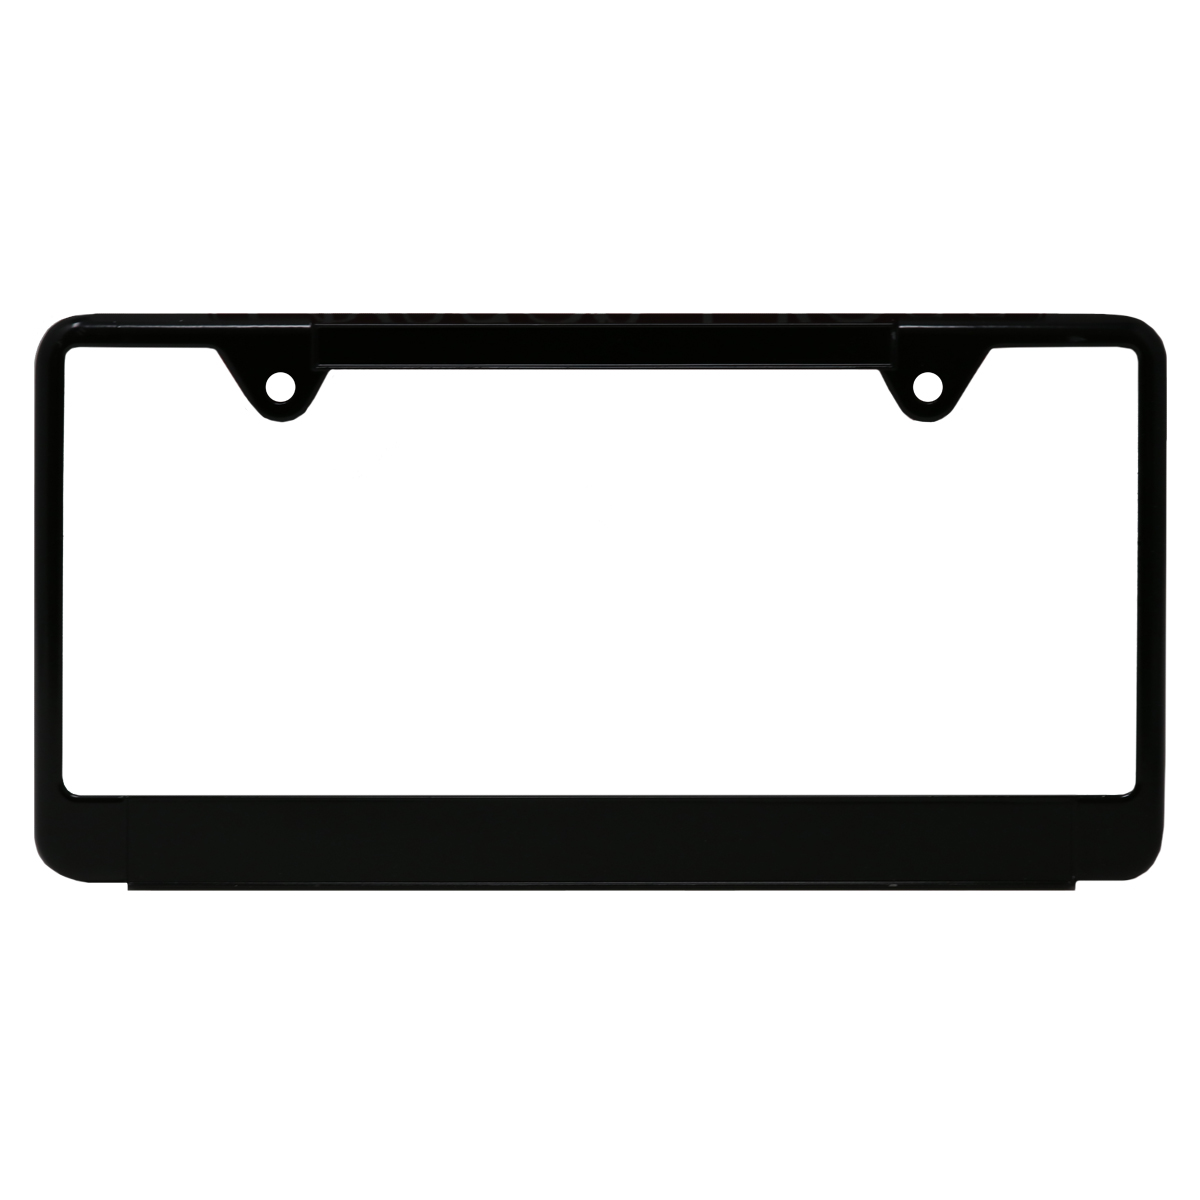 Made In Pennsylvania Country Tag Steel Metal License Plate Frame 